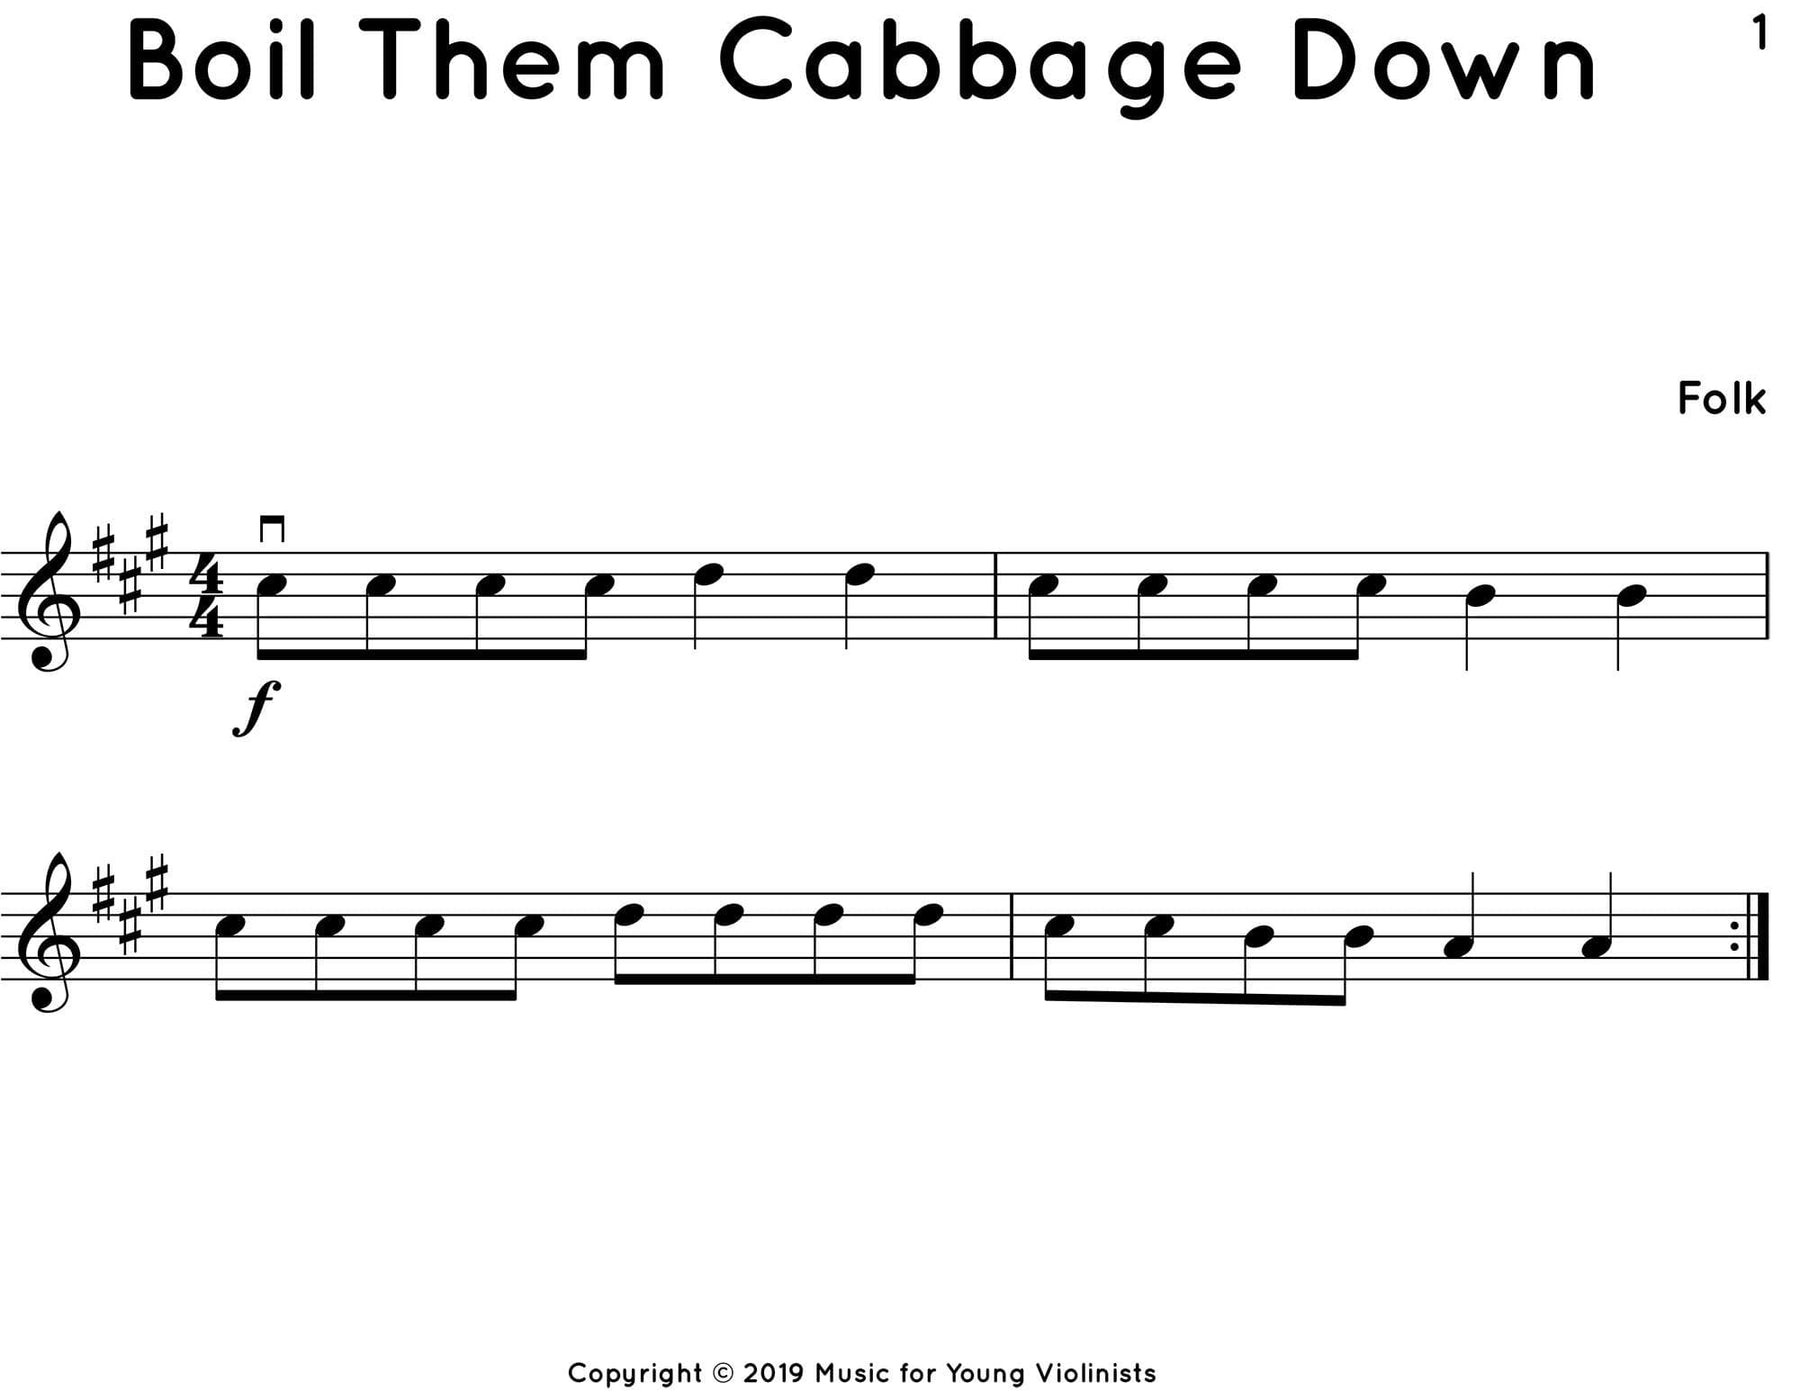 10 Boil Them Cabbage Down Solos for Beg. Violin